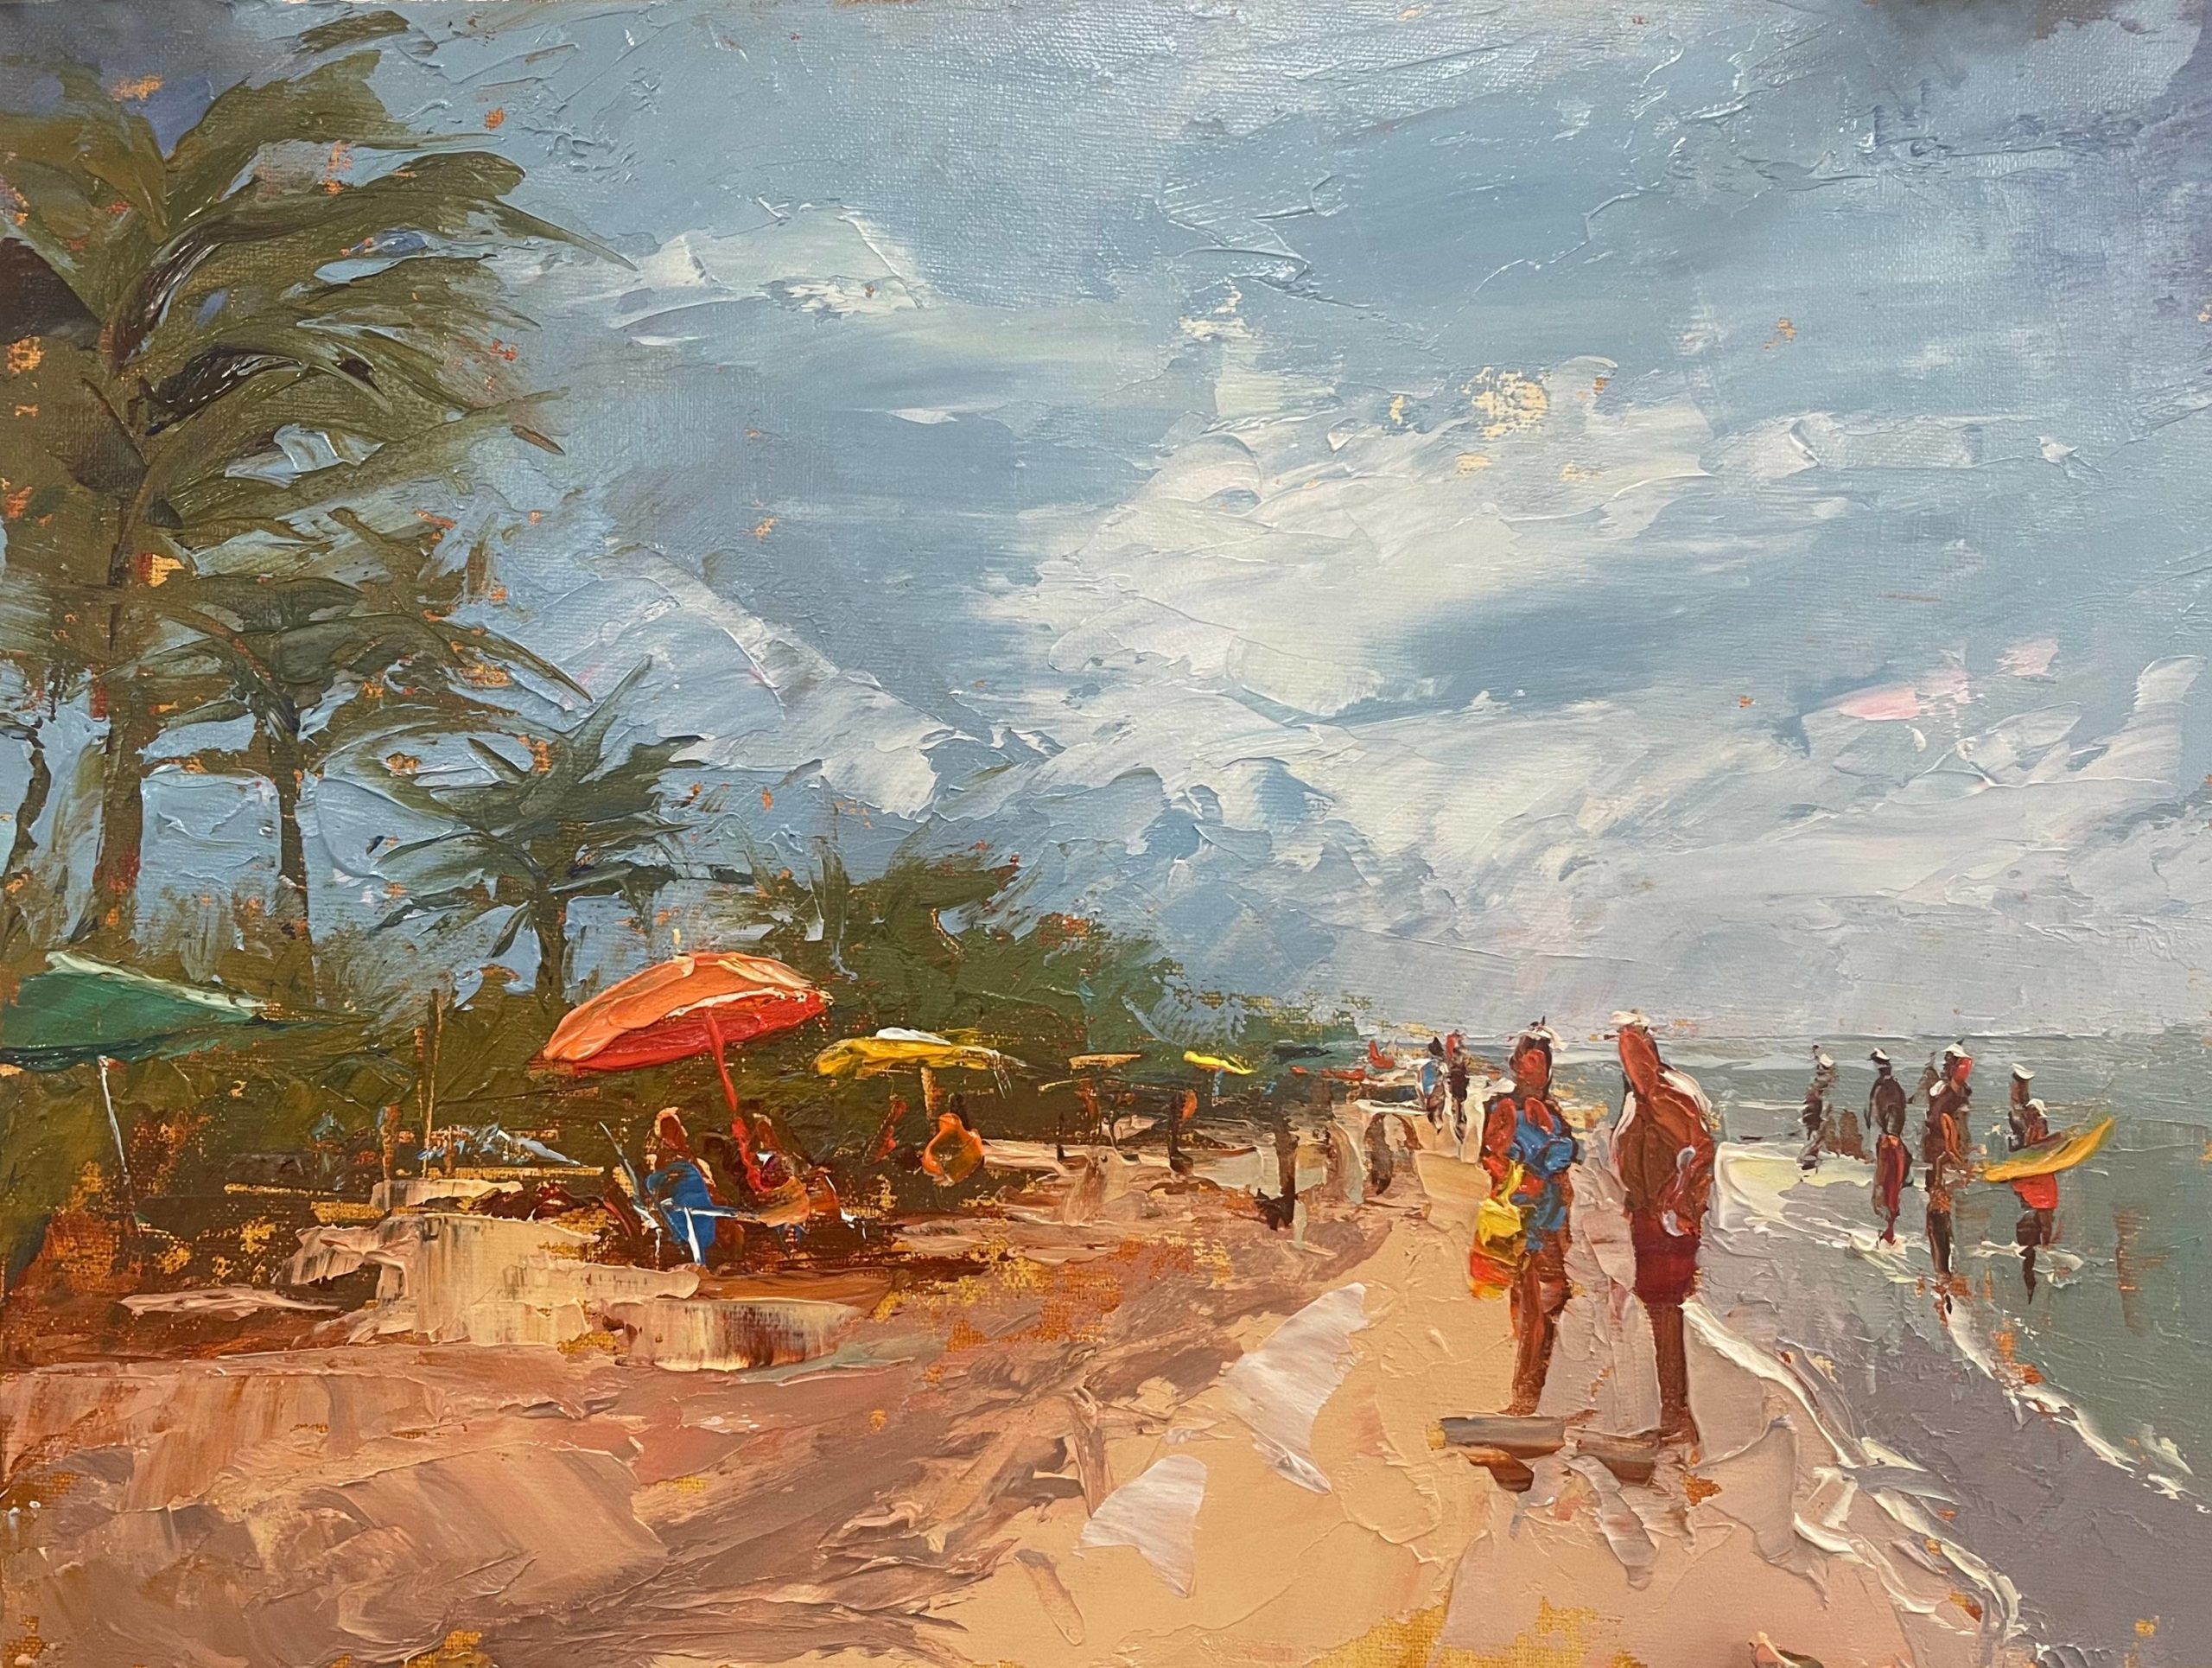 Michele Byrne, "Bonita Beach Afternoon," 2022, oil, 9 x 12 in., Available from artist, Studio from plein air study